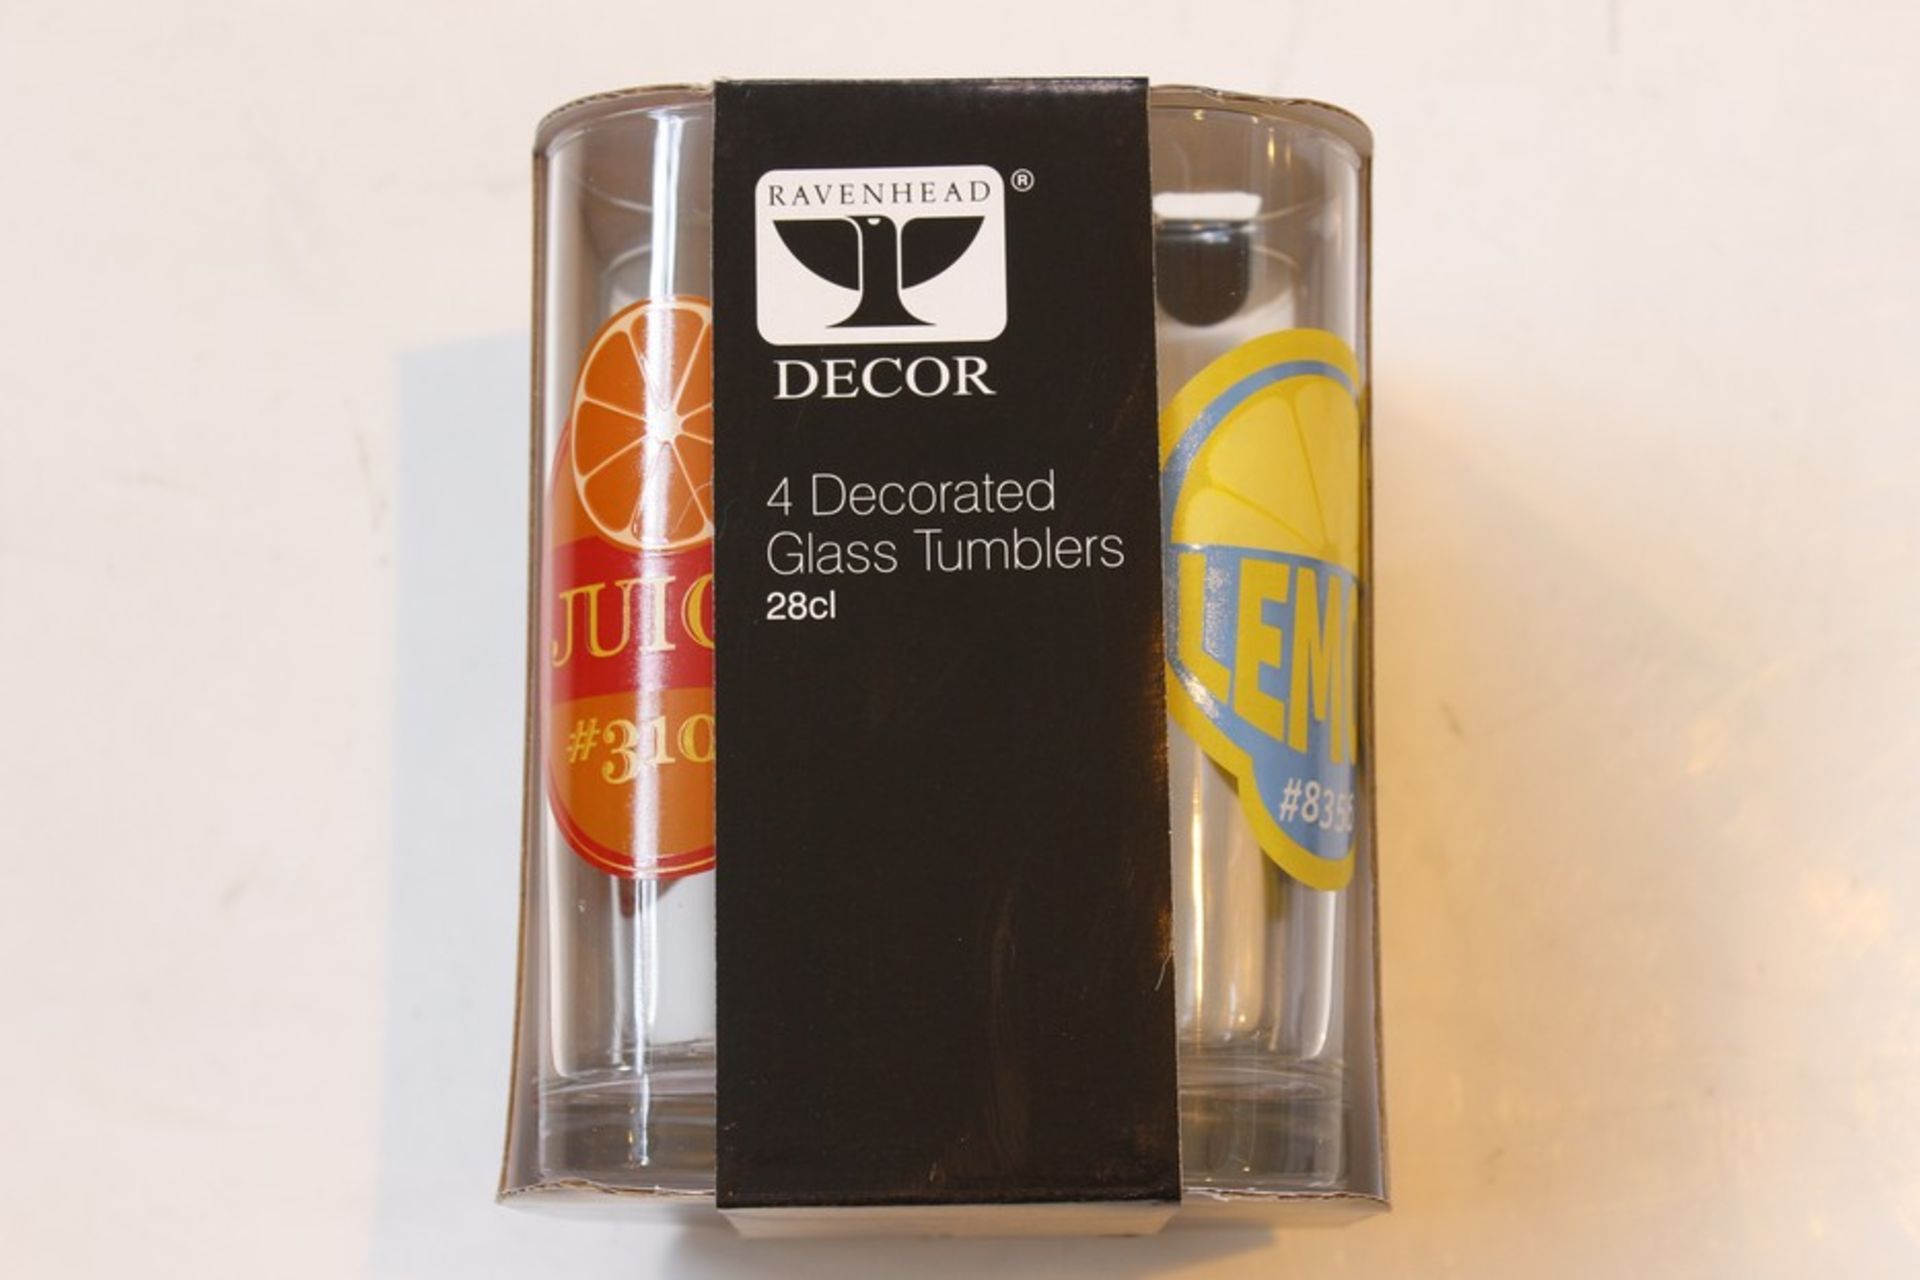 6 x BRAND NEW PACKS OF 4 RAVENHEAD DECO DECORATED GLASS TUMBLERS  *PLEASE NOTE THAT THE BID PRICE IS